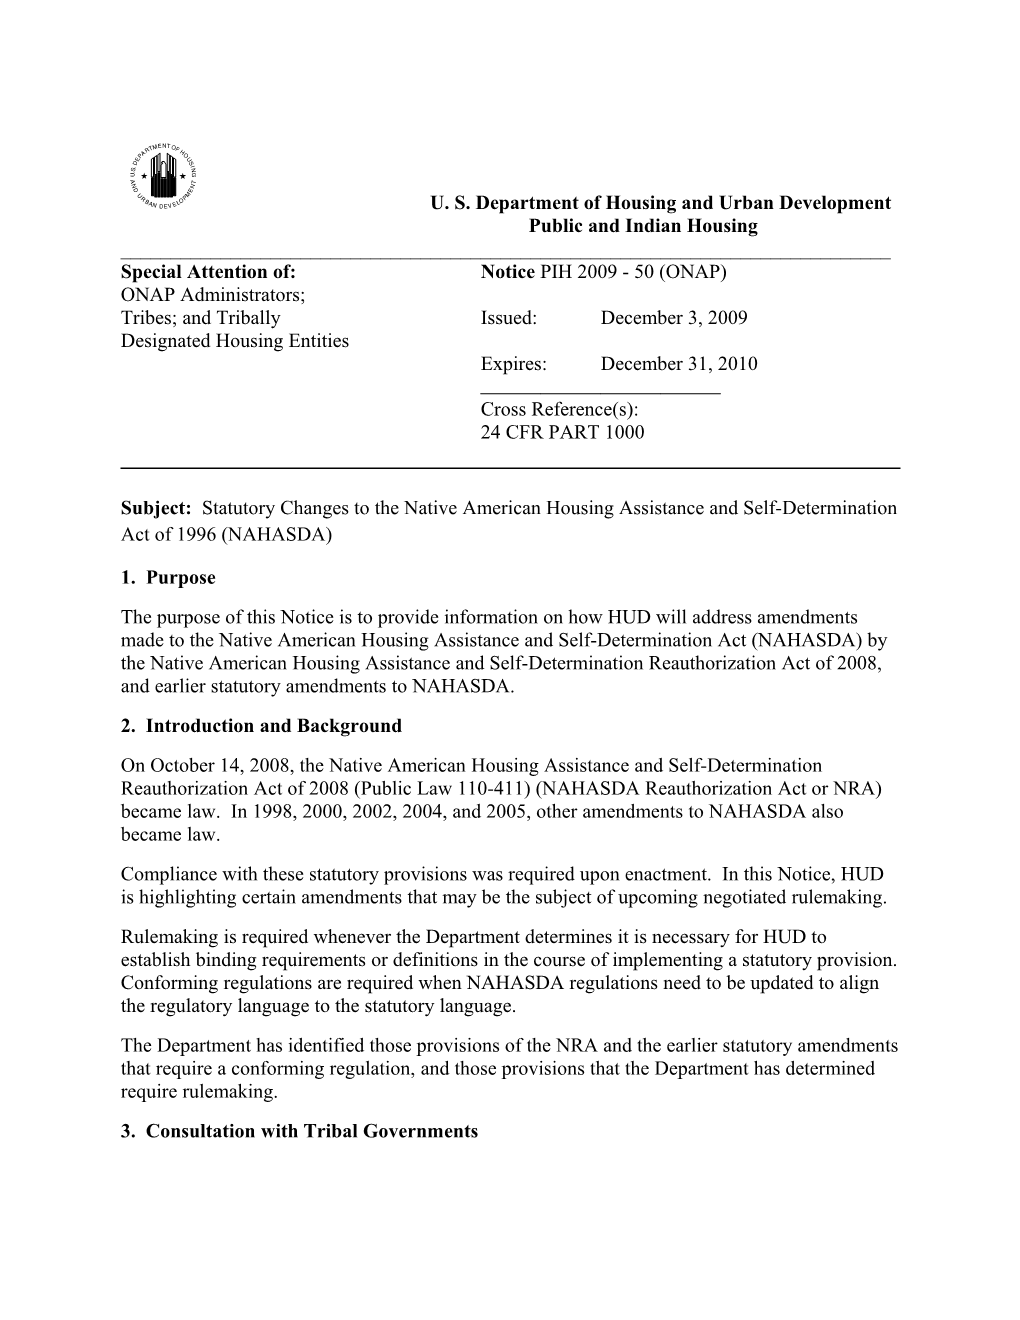 Subject: Implementation of Statutory Changes to the Native American Housing Assistance